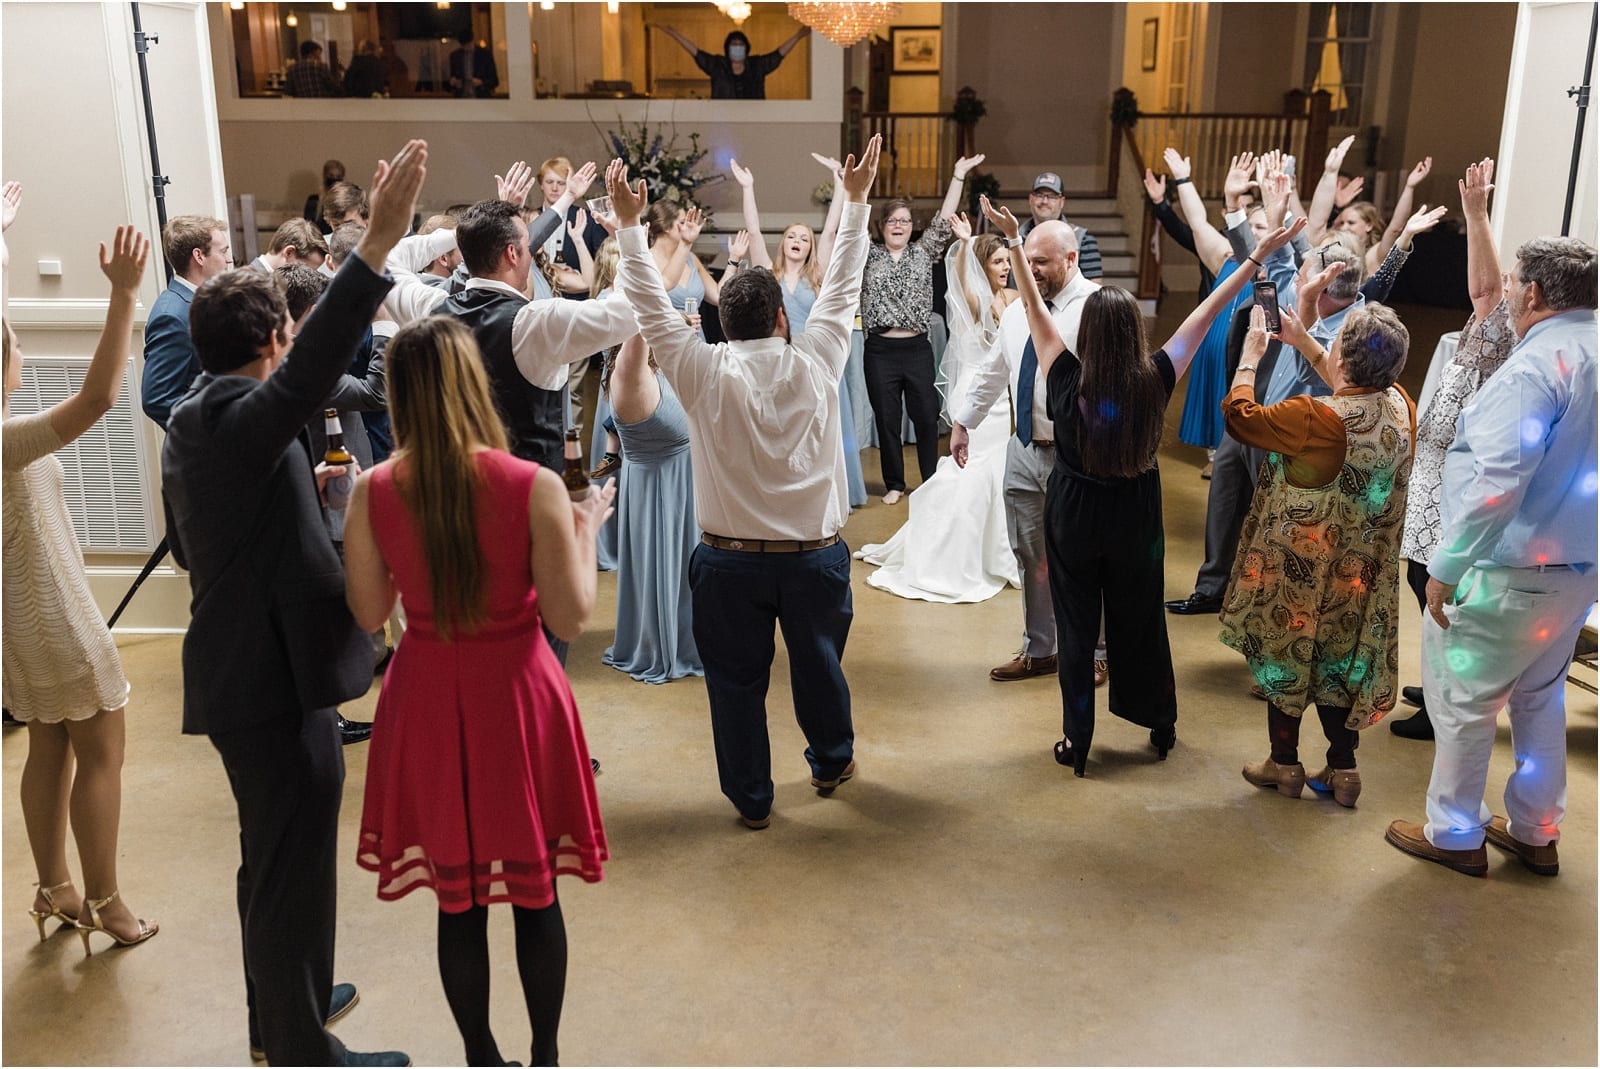 guests dancing to YMCA at the wedding reception